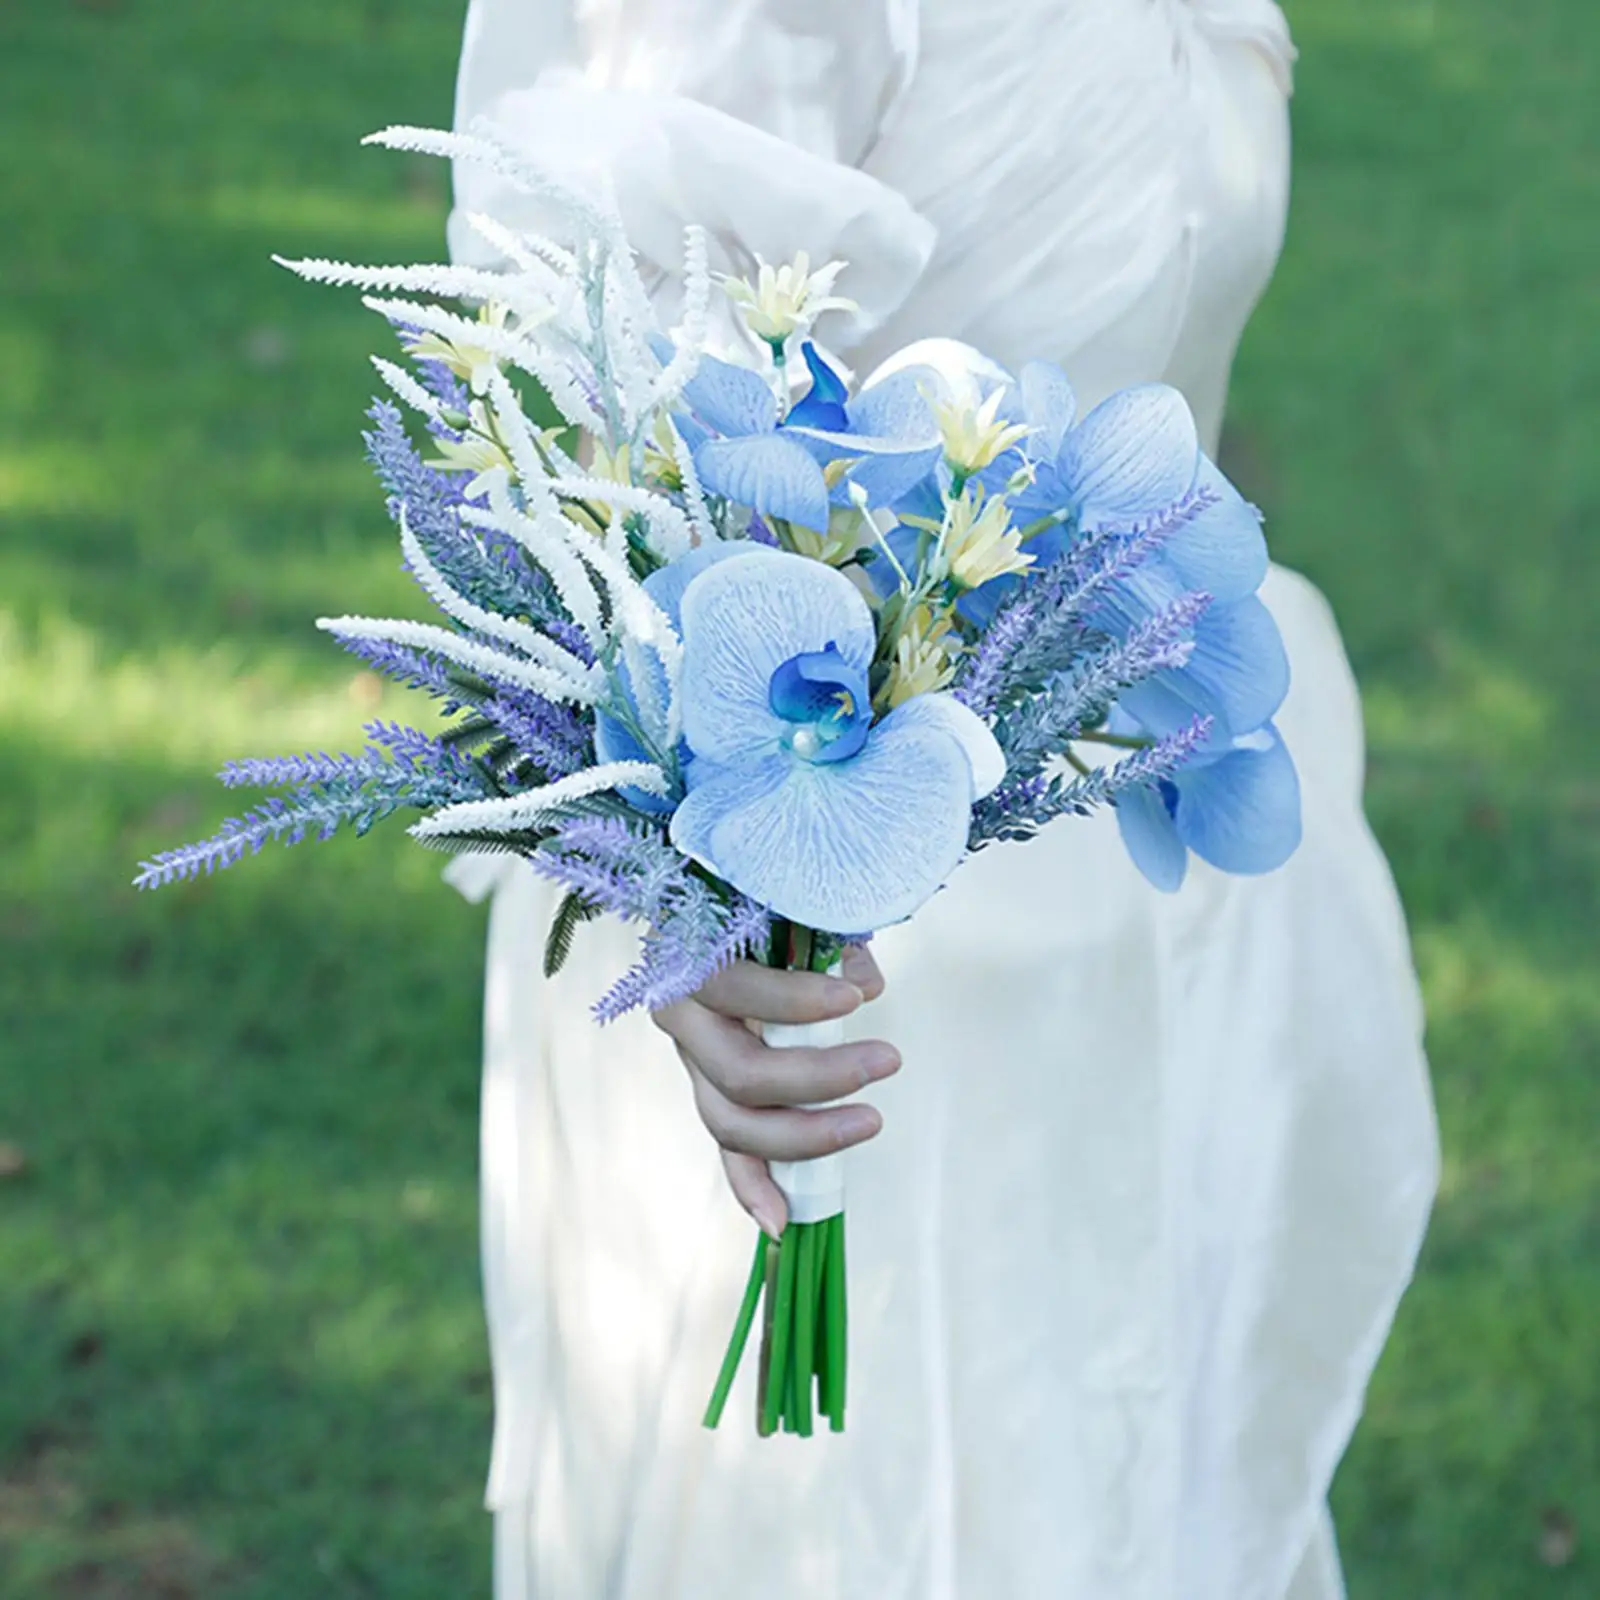 Wedding Bouquets for Bride, Artificial Bridal Bouquet for Rustic Wedding Ceremony Anniversary